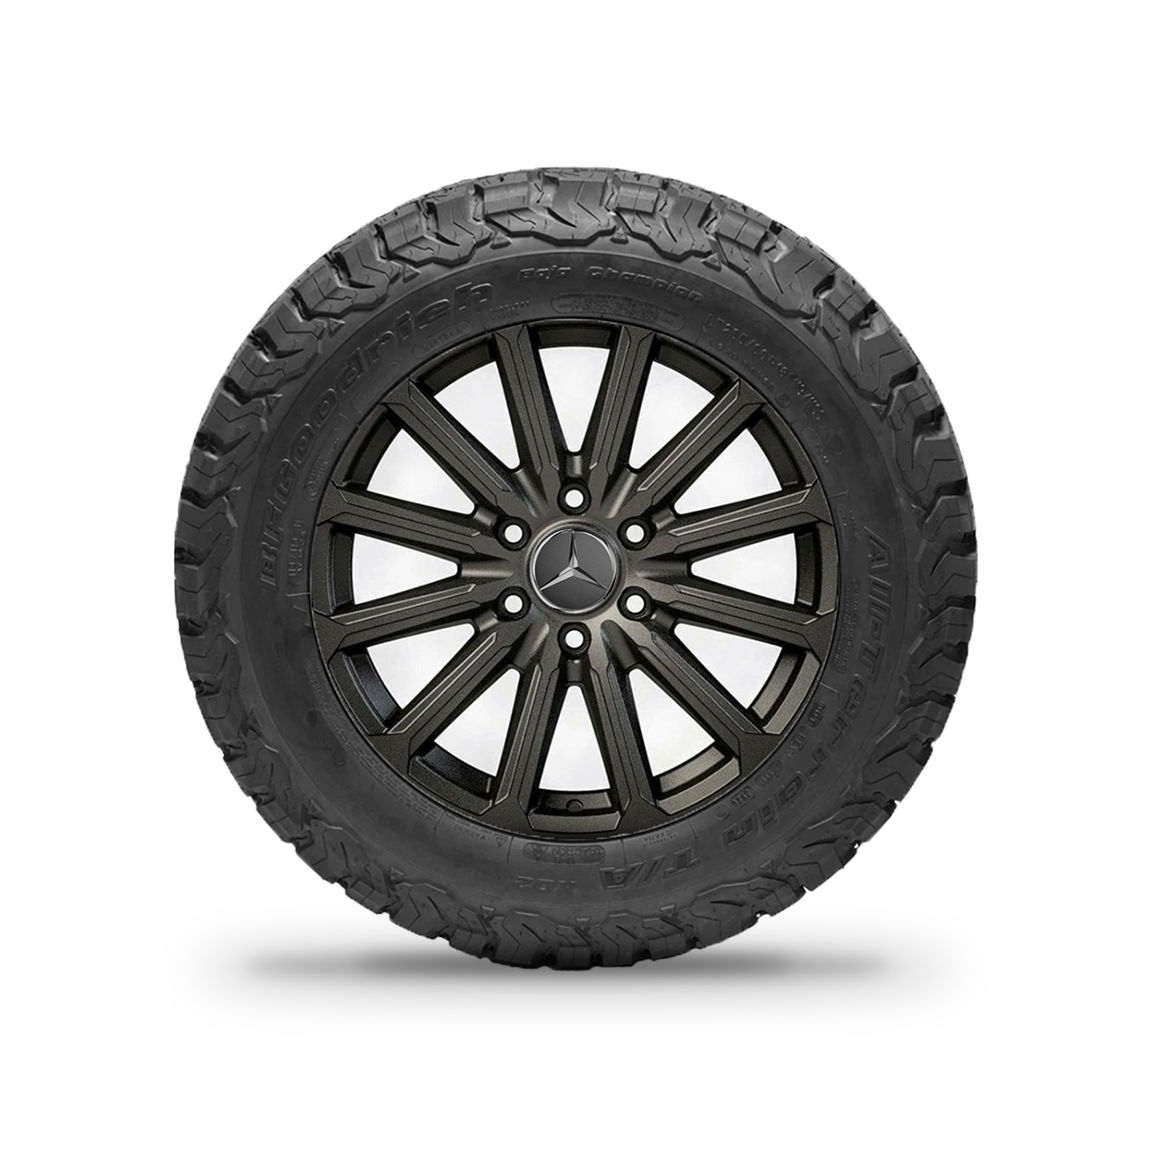 Stealth Tire and Wheel Package - Matte Black 18" - Flarespace Adventure Van Conversion Parts